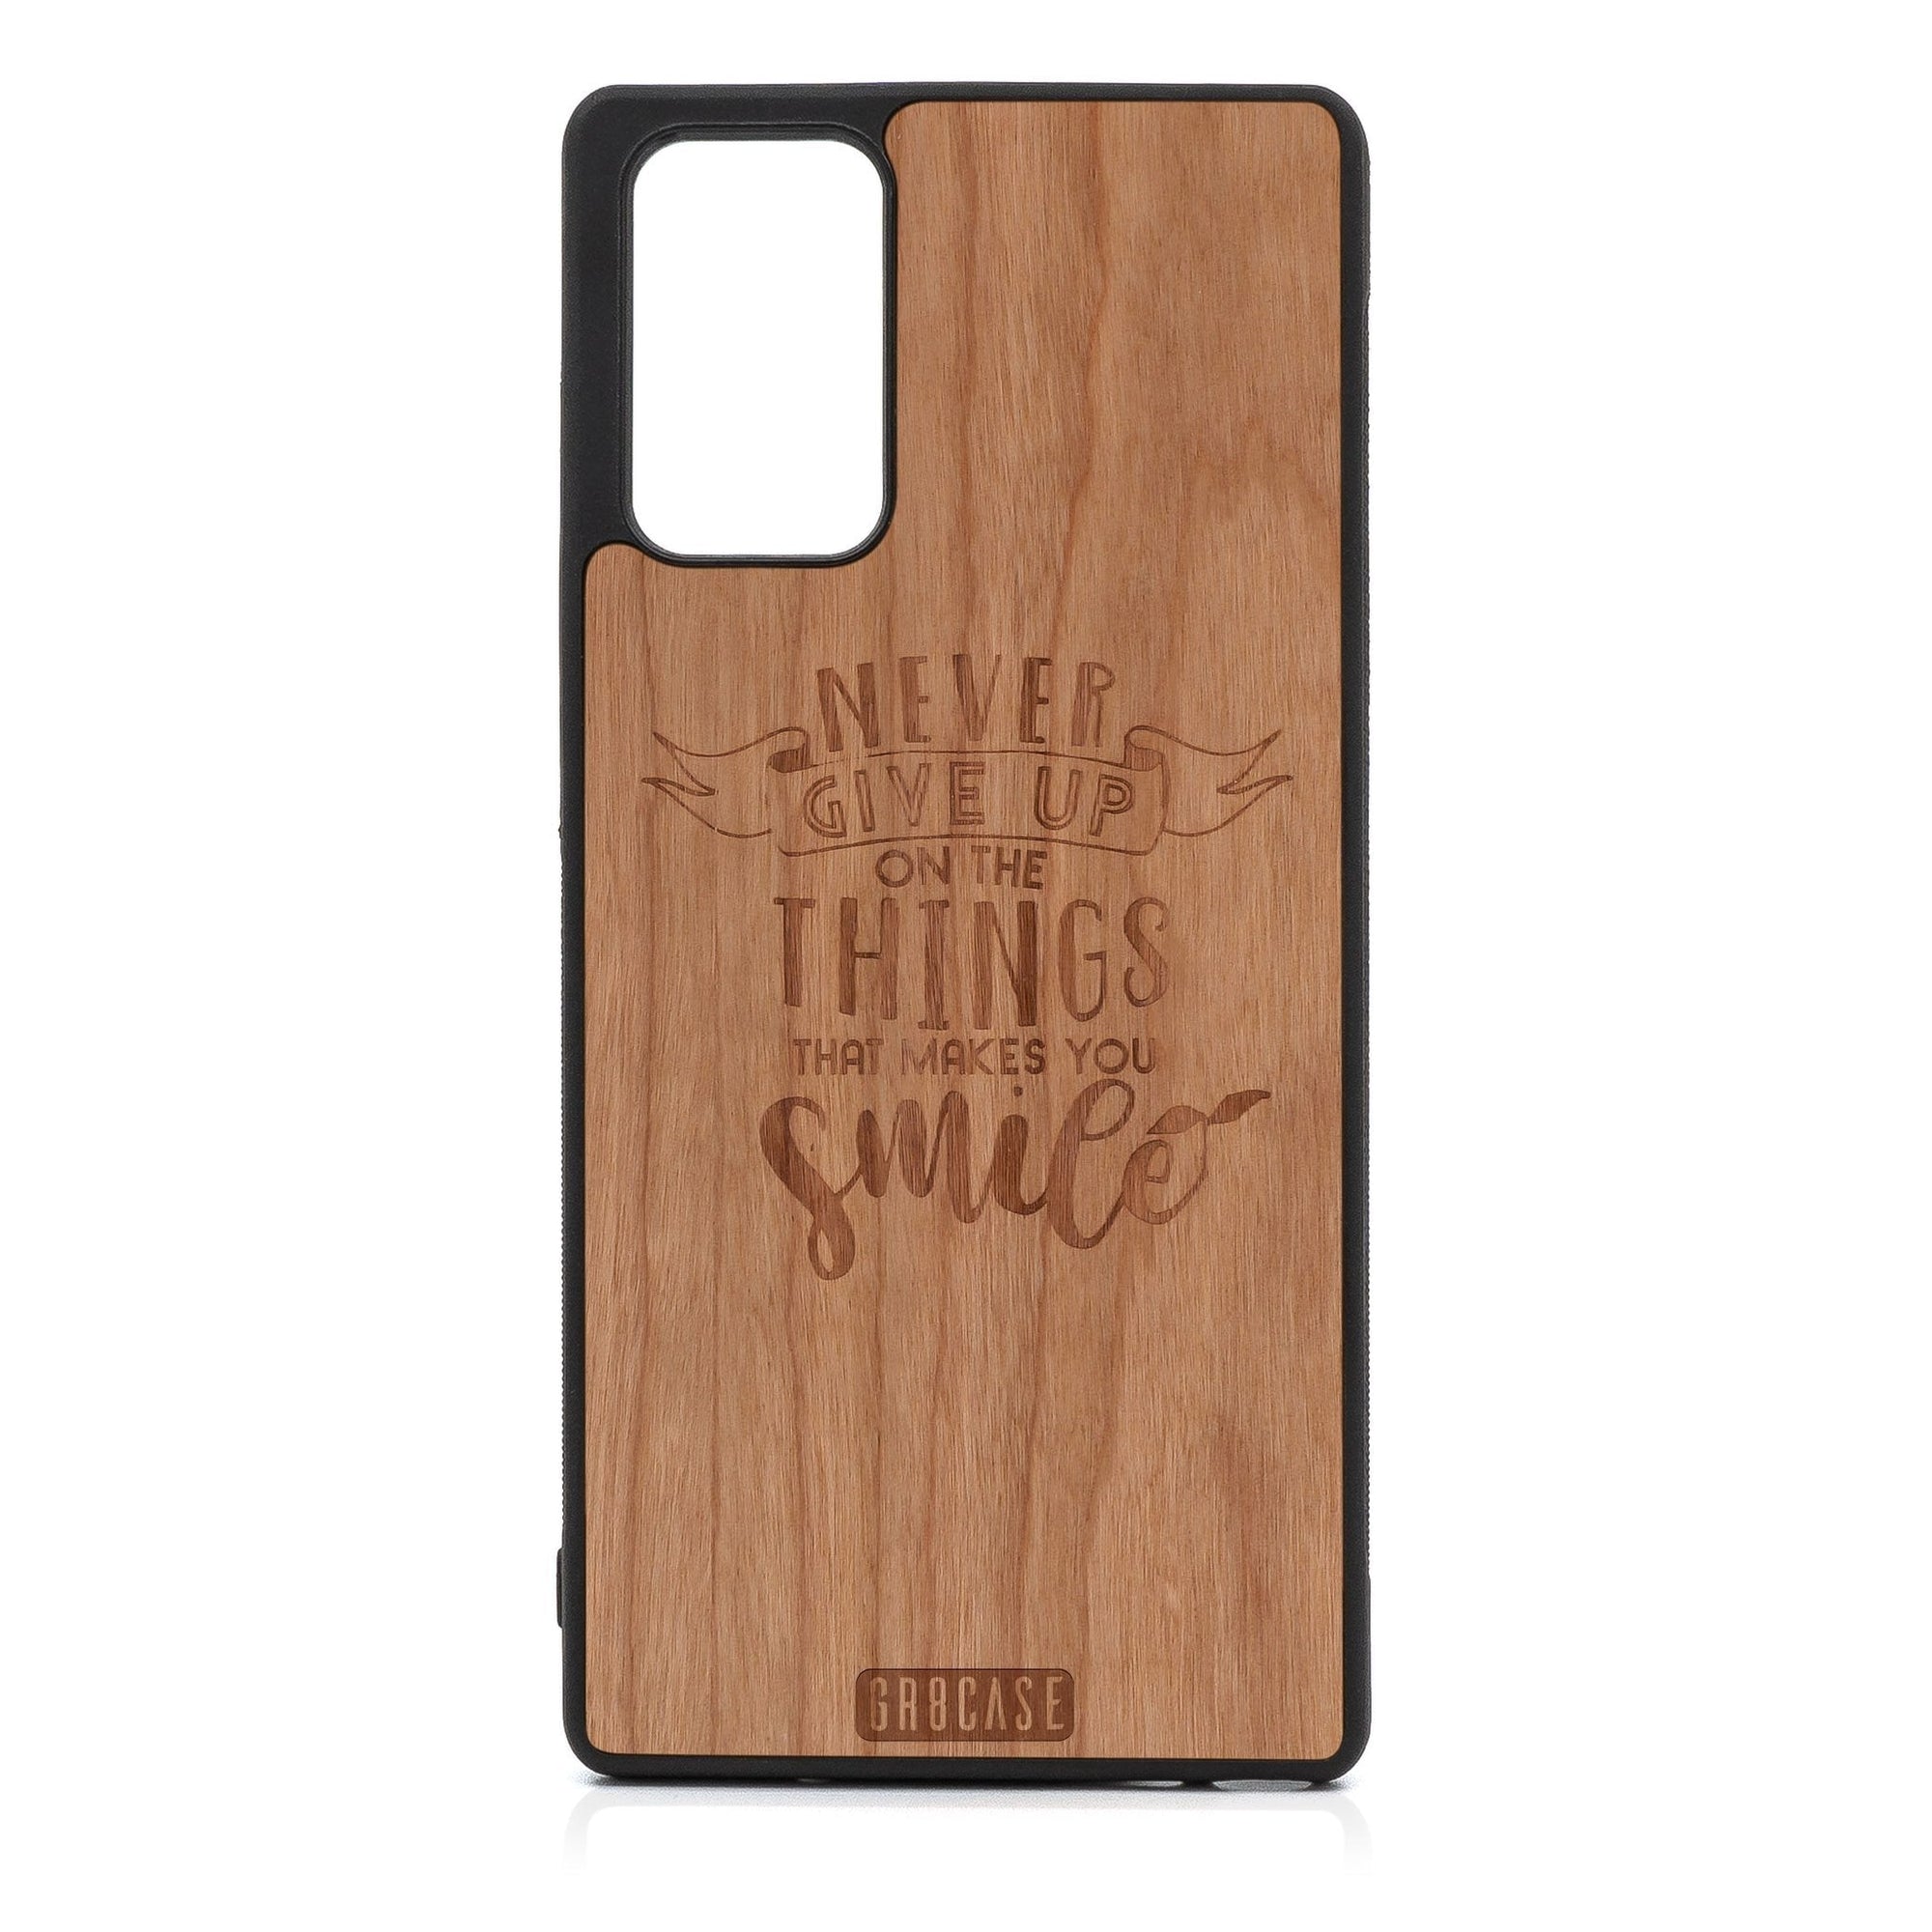 Never Give Up On The Things That Makes You Smile Design Wood Case For Samsung Galaxy A53 5G